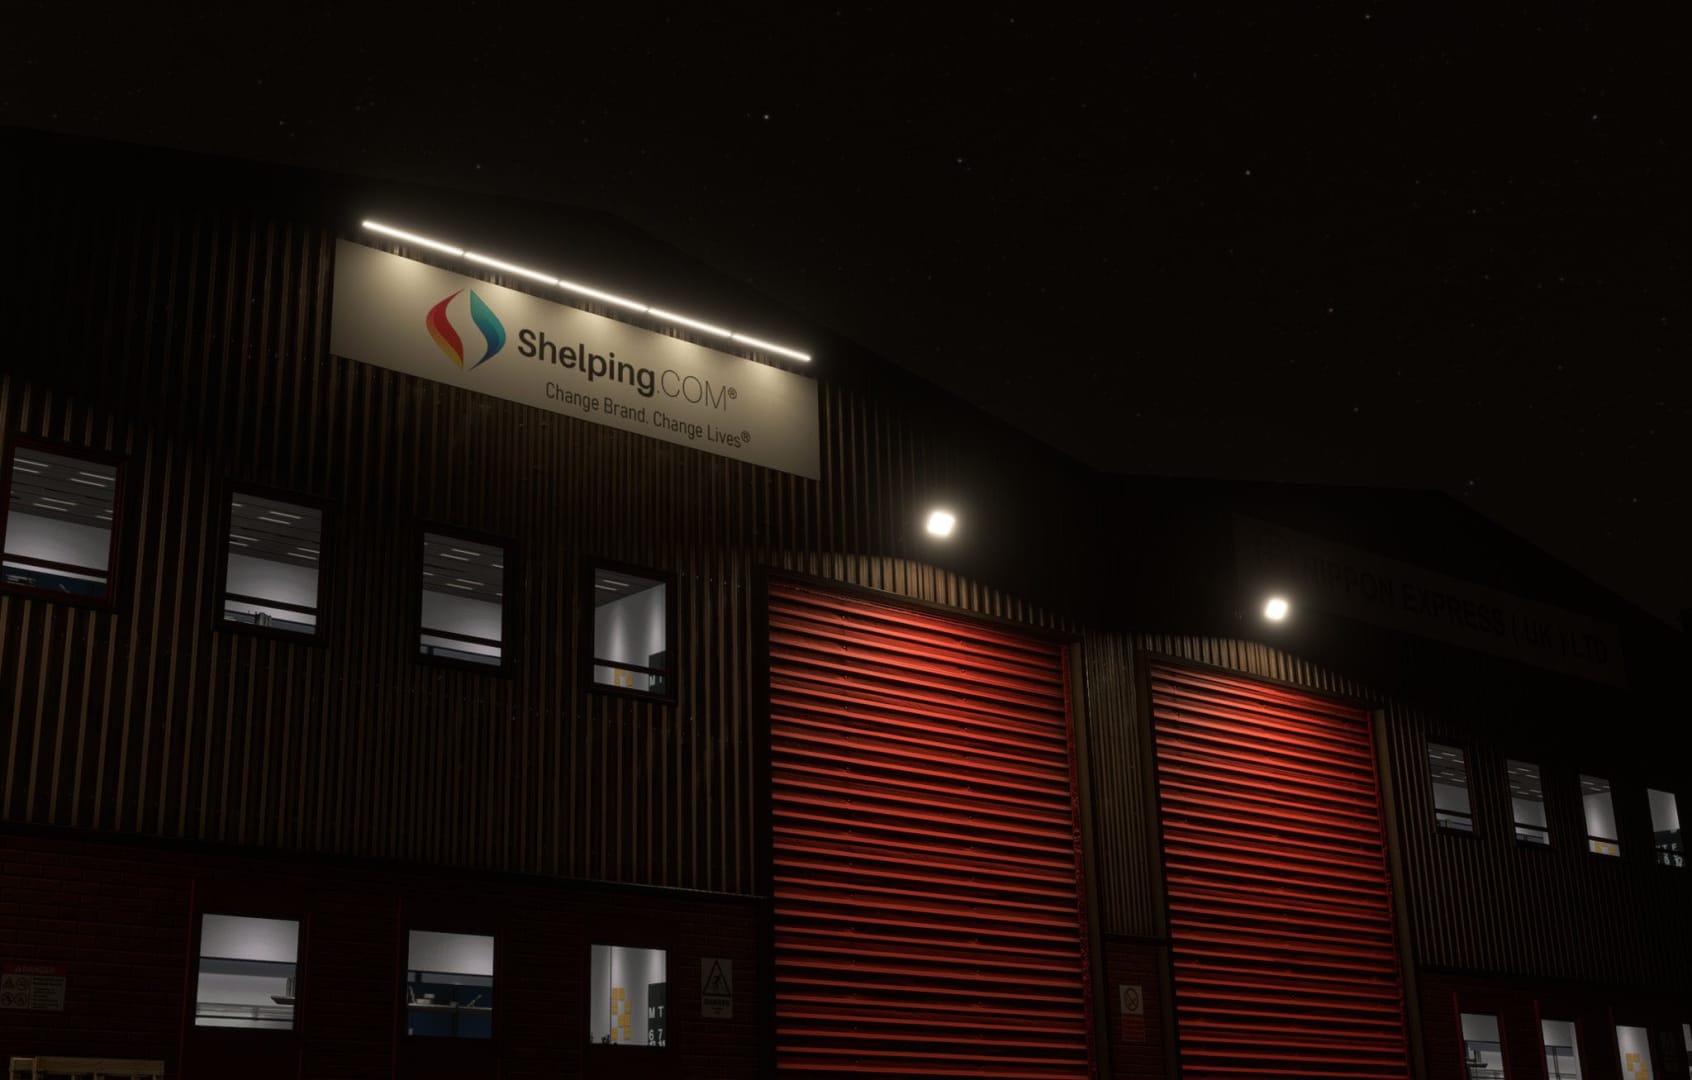 Microsoft Flight Simulator East Midlands Airport by Pyreegue